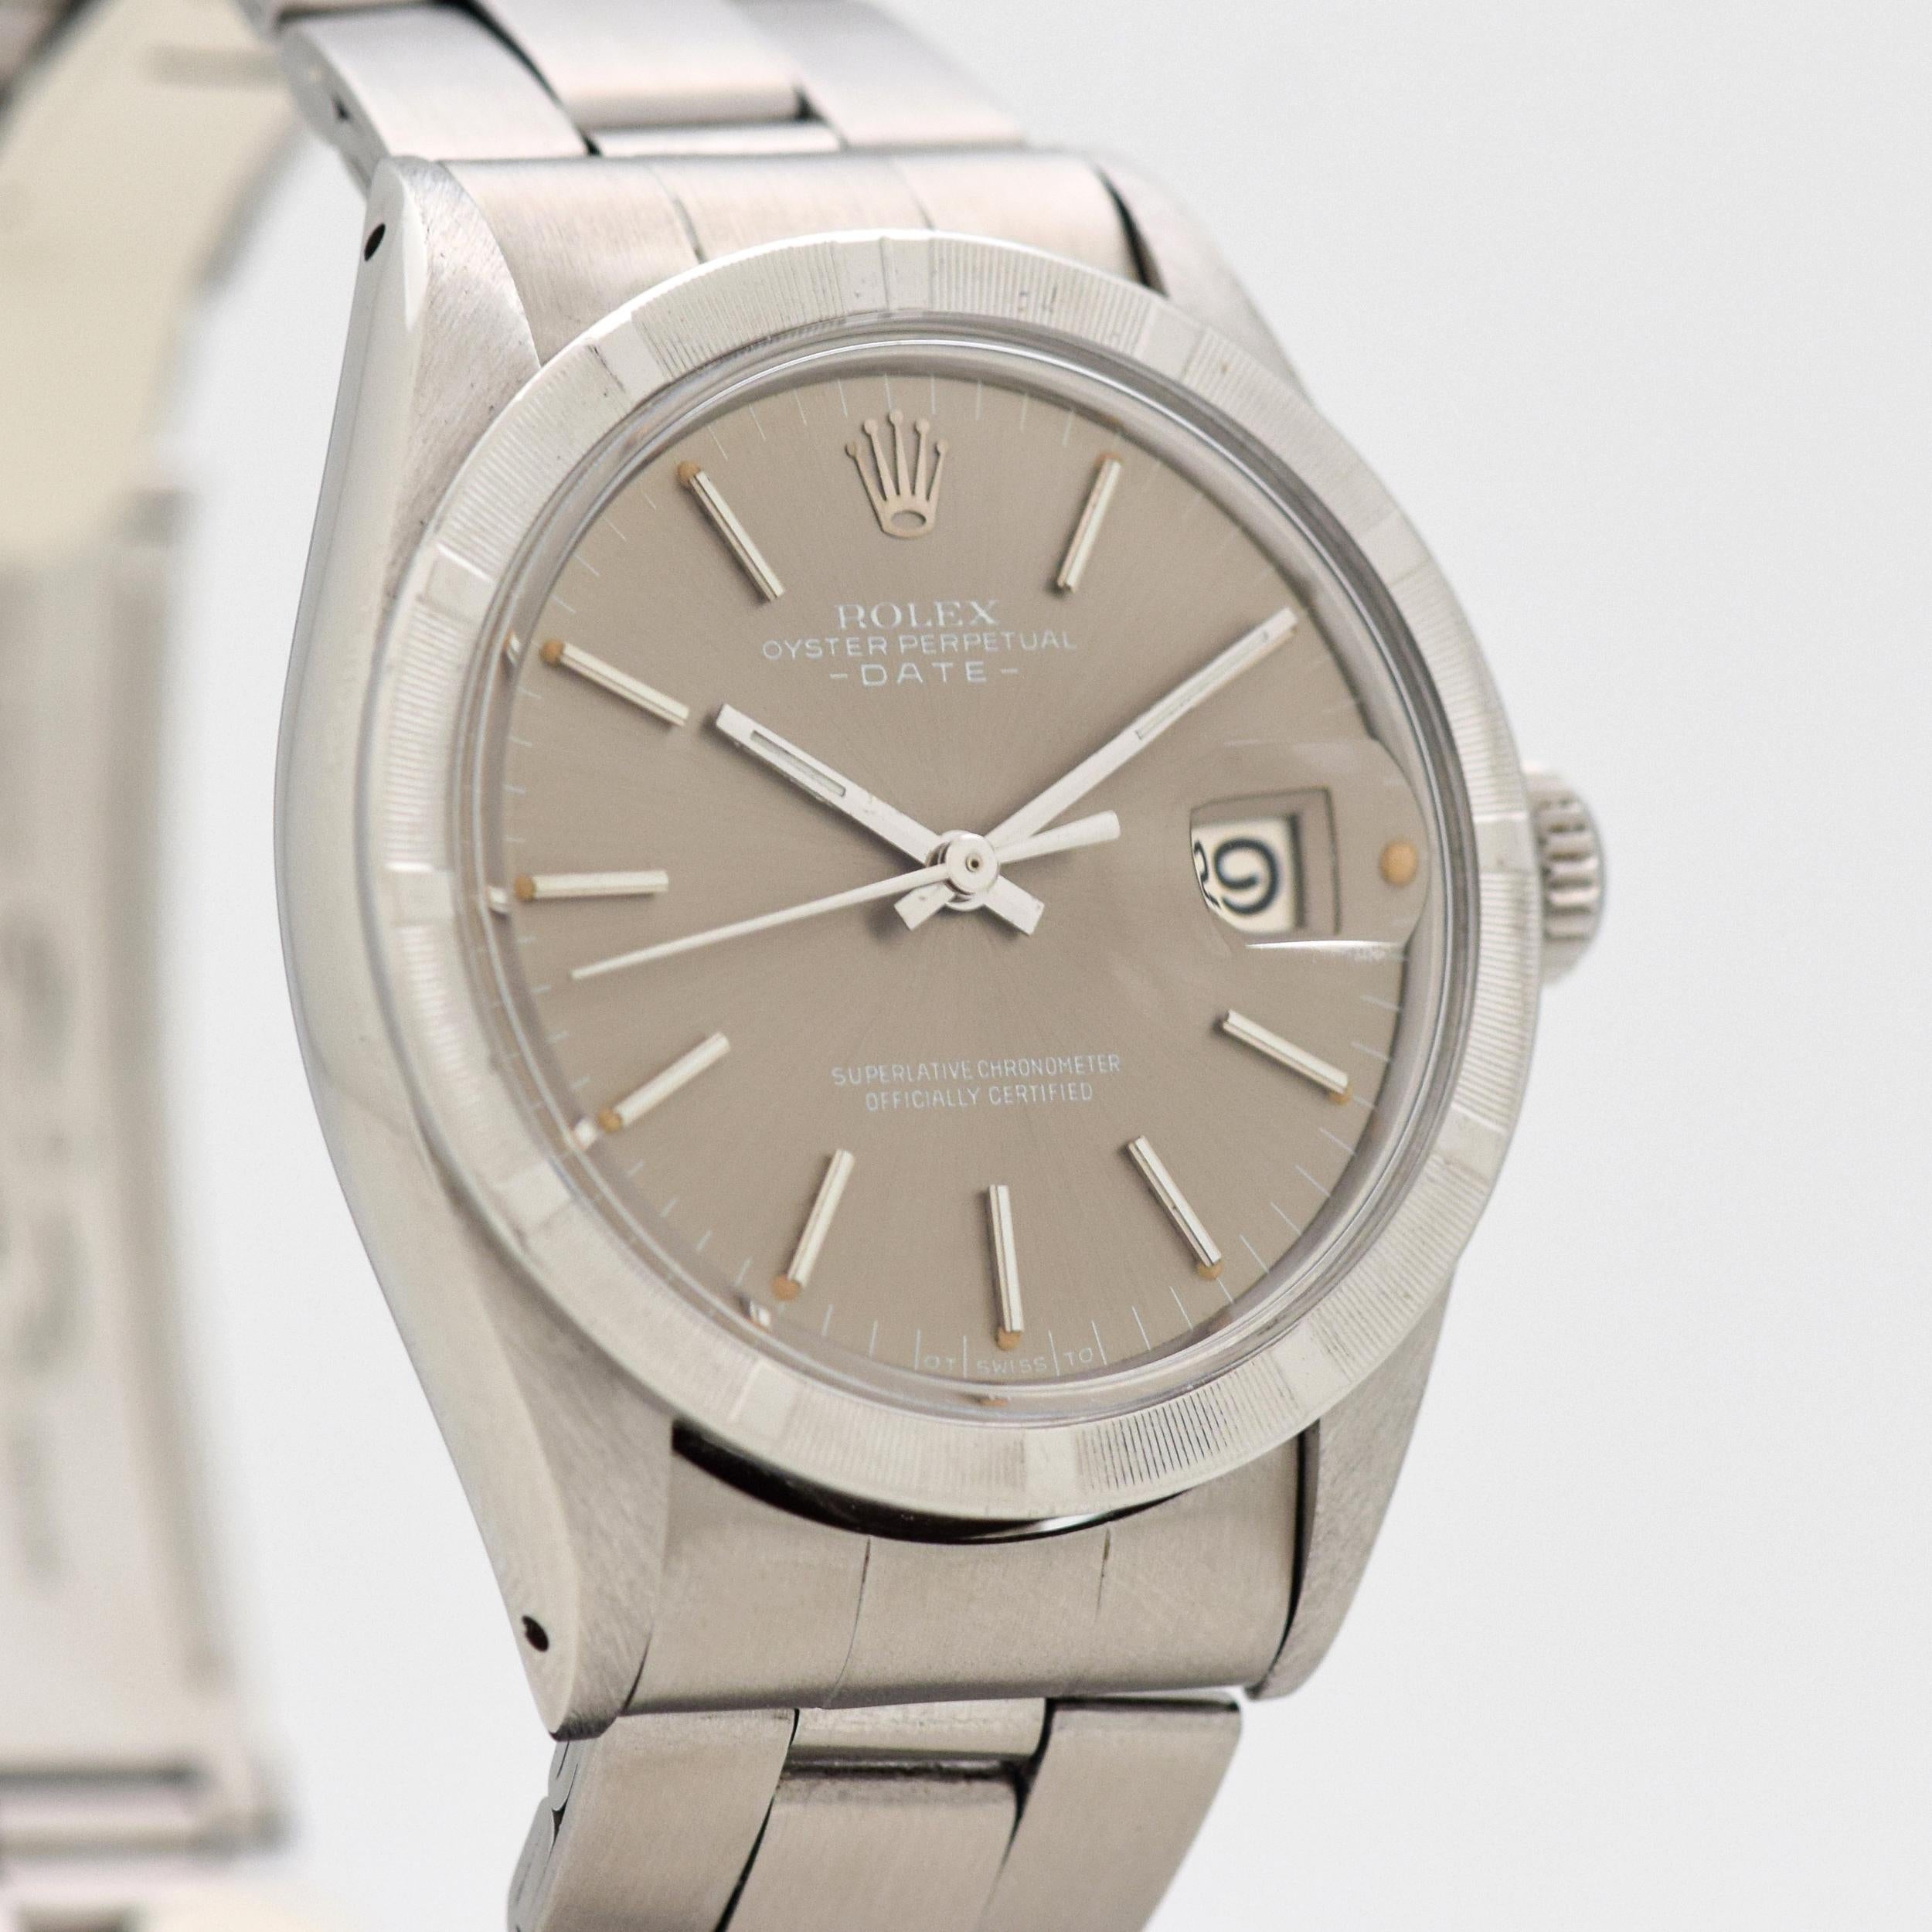 1971 Vintage Rolex Date Automatic Reference 1501 Stainless Steel Watch. Case size, 35mm wide. Features a stainless steel, machined bezel. Grey dial with date function. Powered by an automatic caliber movement. Equipped with an original, Rolex Oyster